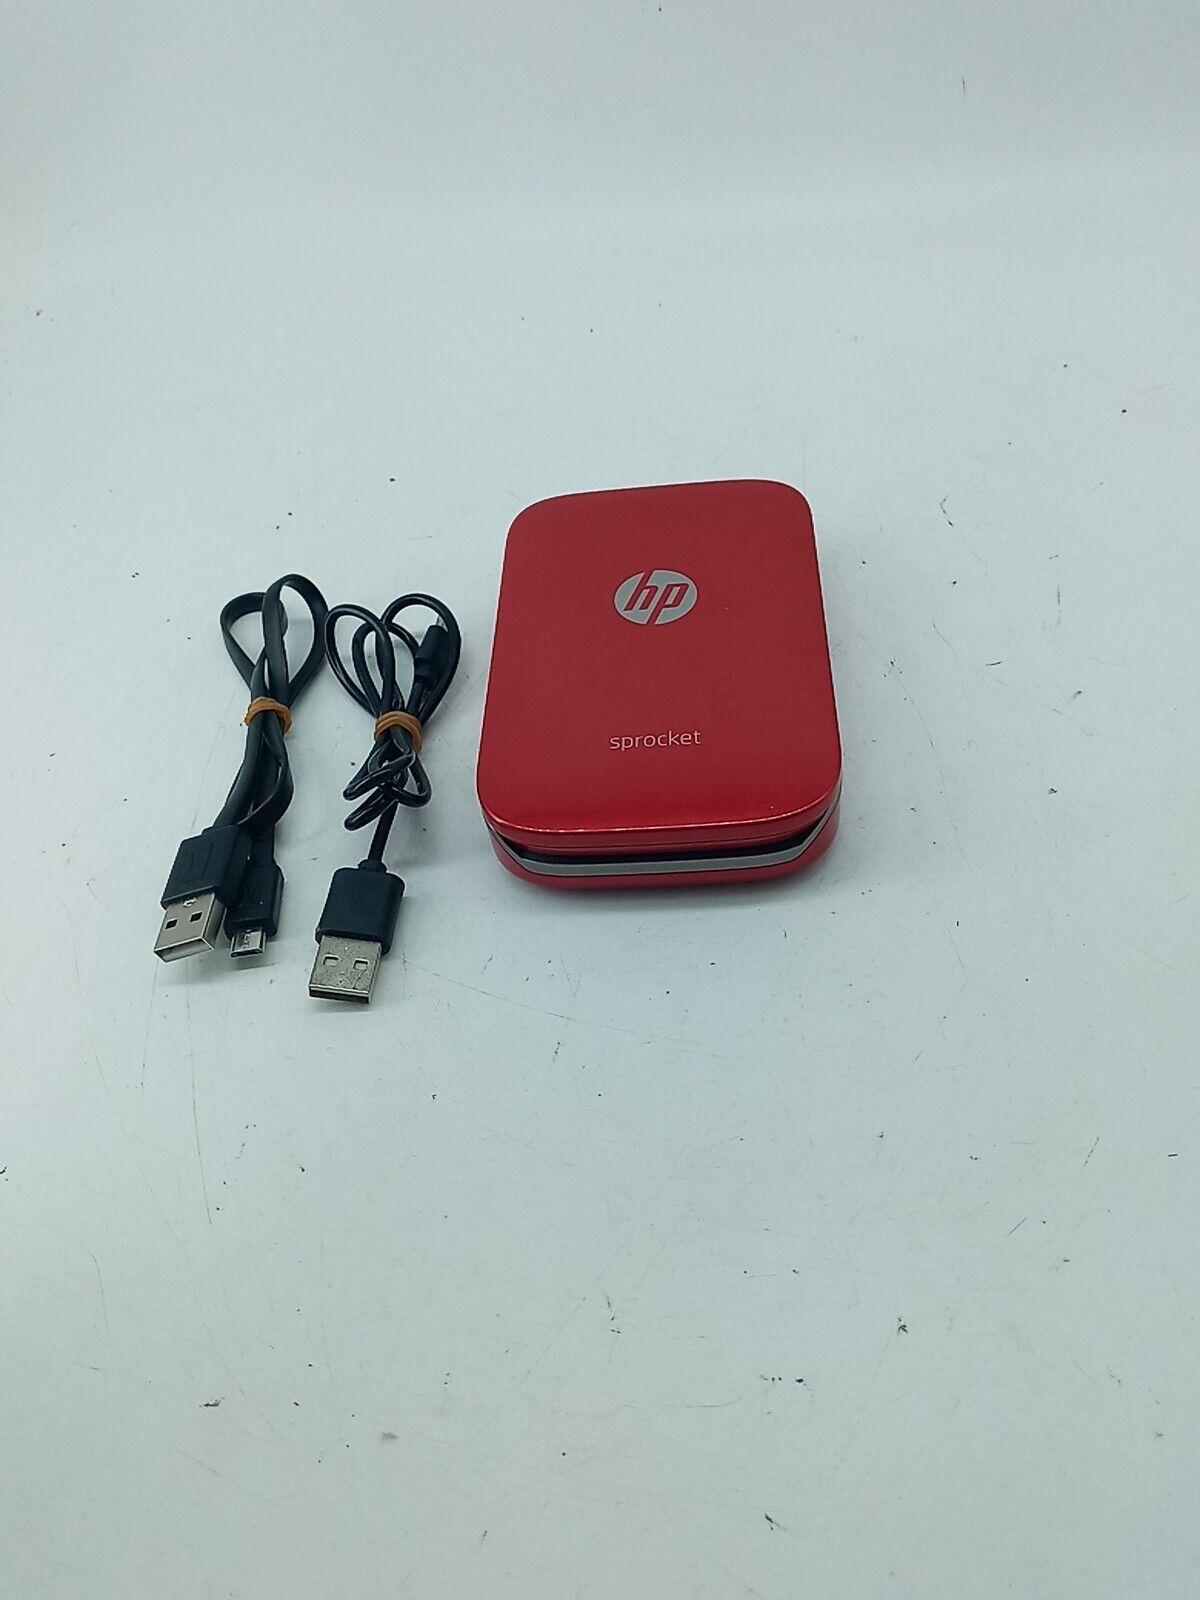 HP Sprocket Bluetooth Photo Printer - Red With Charging Cable